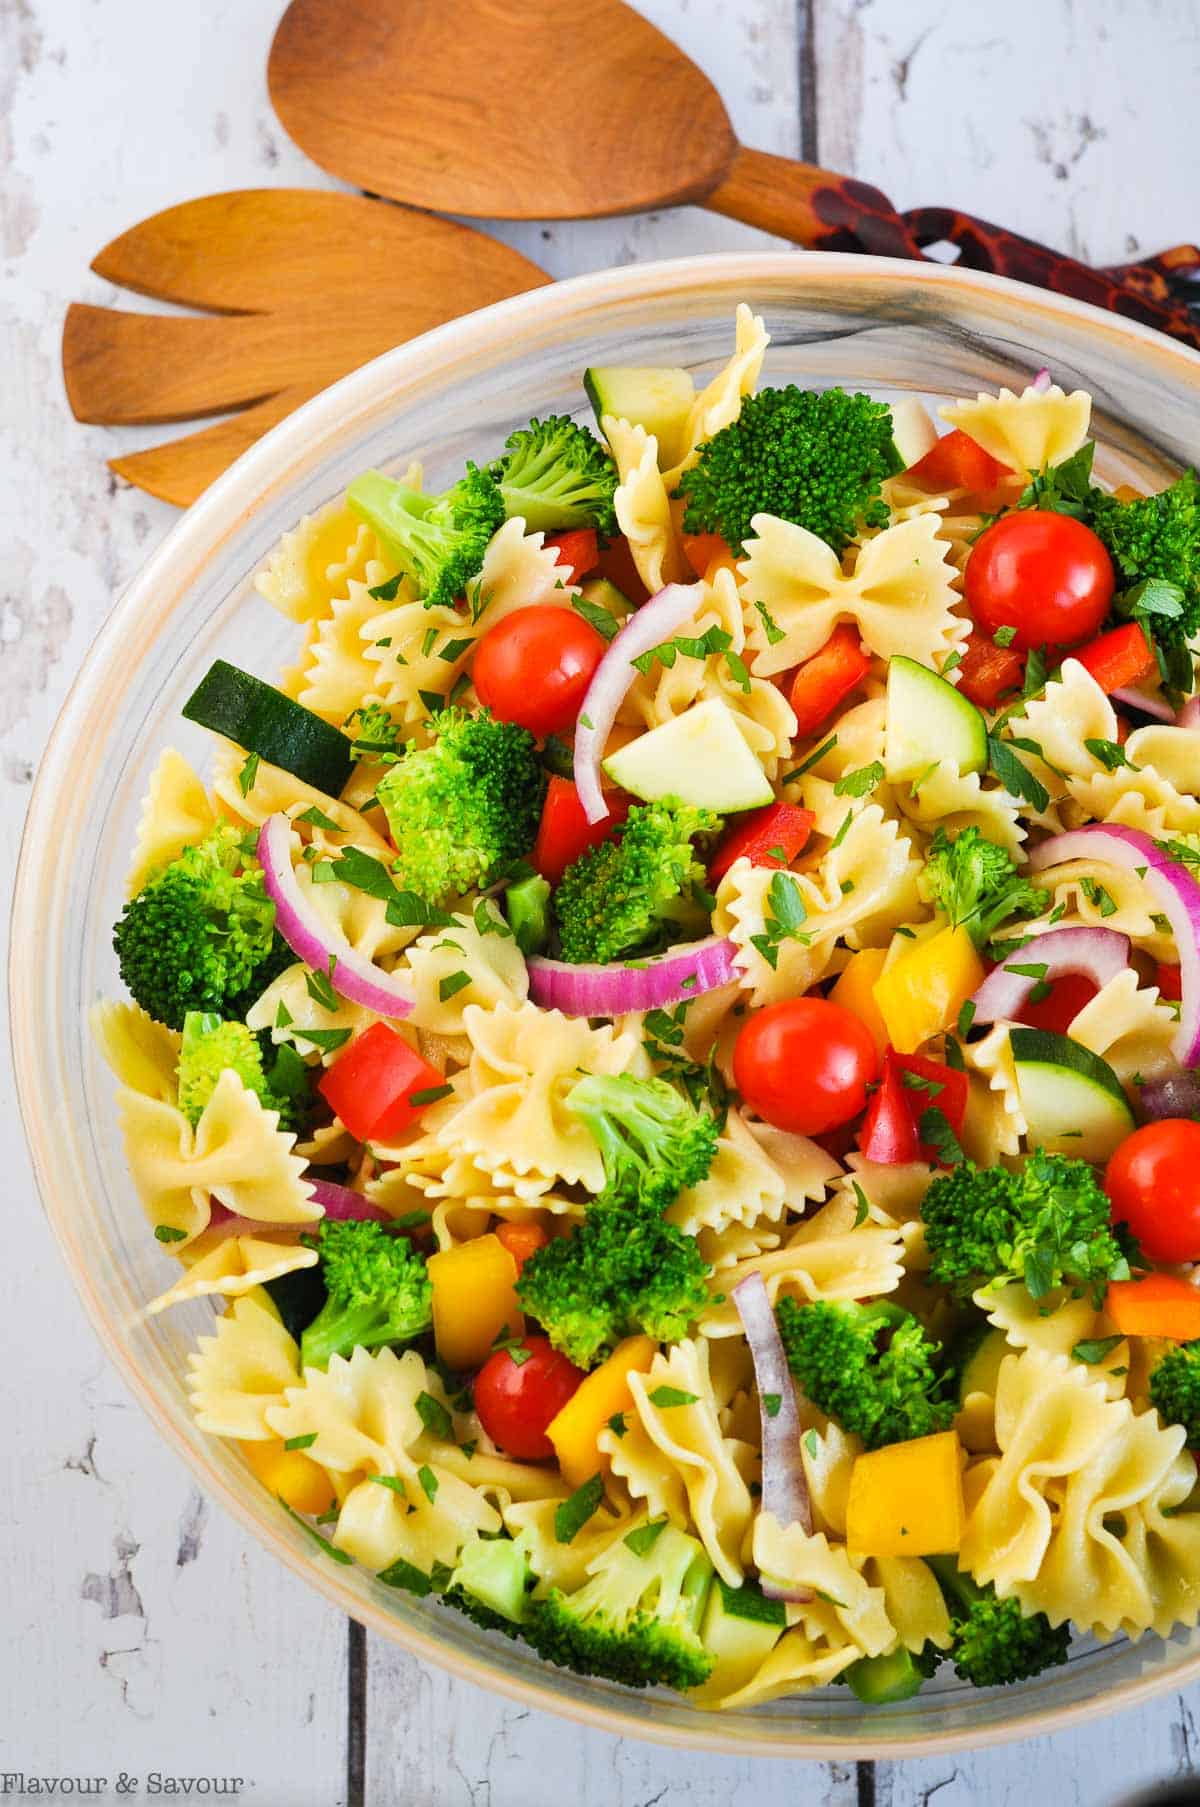 Pasta Salad with broccoli, tomatoes and zucchini in a bowl